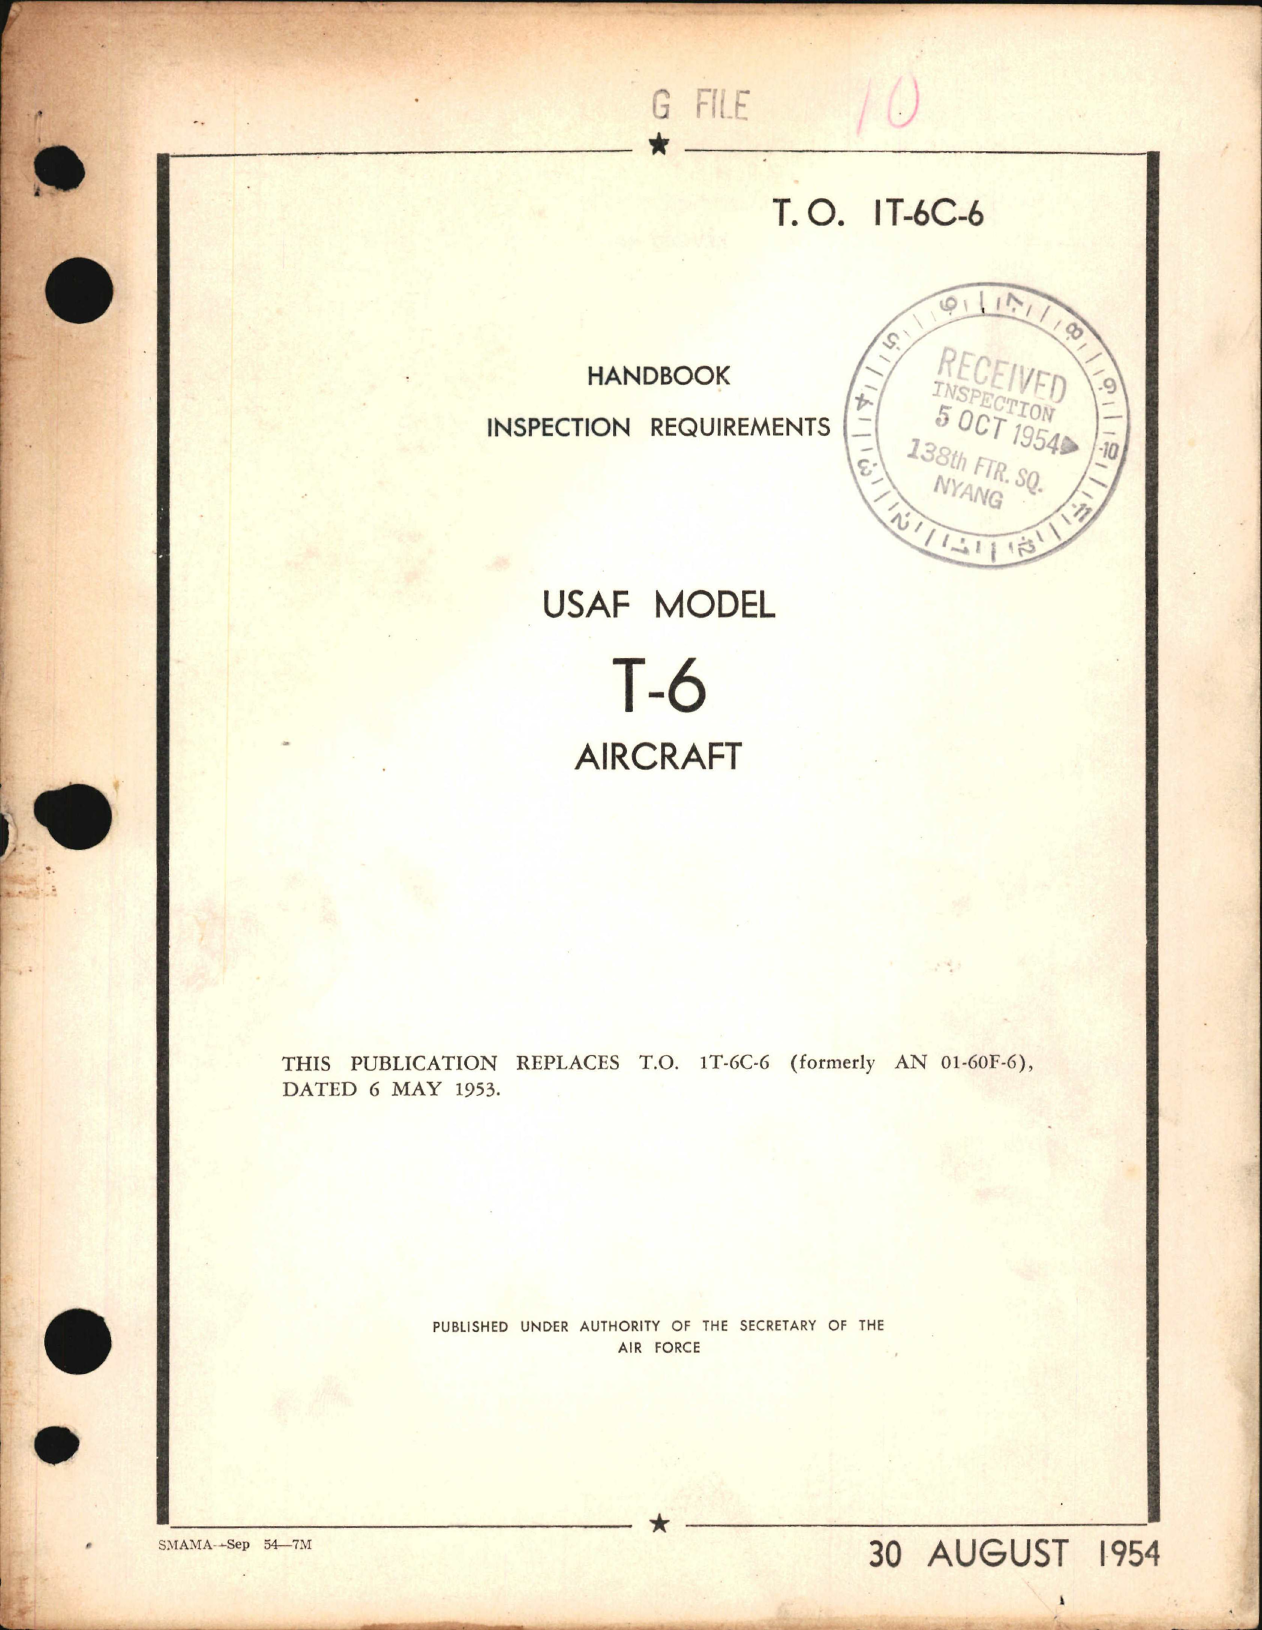 Sample page 1 from AirCorps Library document: Inspection Requirements for T-6